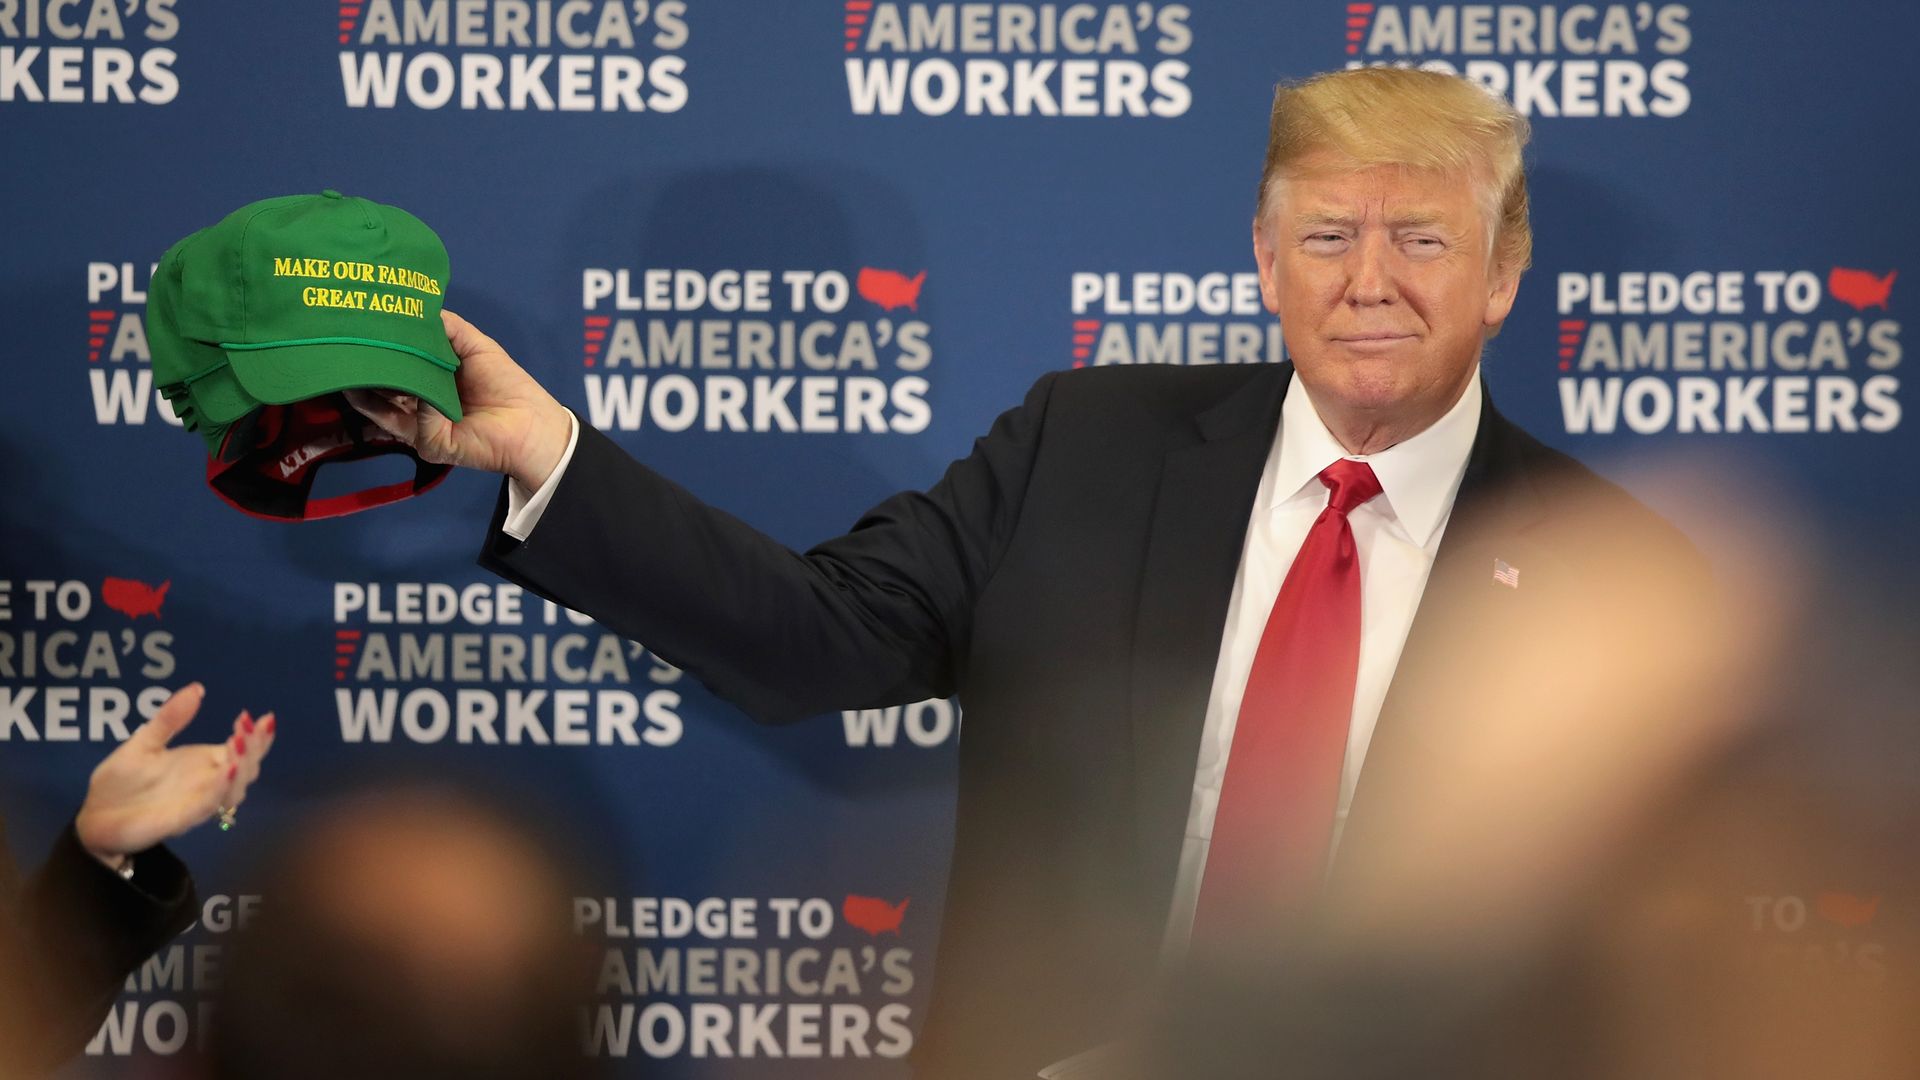 President Trump holding a green hat that says "Make Our Farmers Great Again"